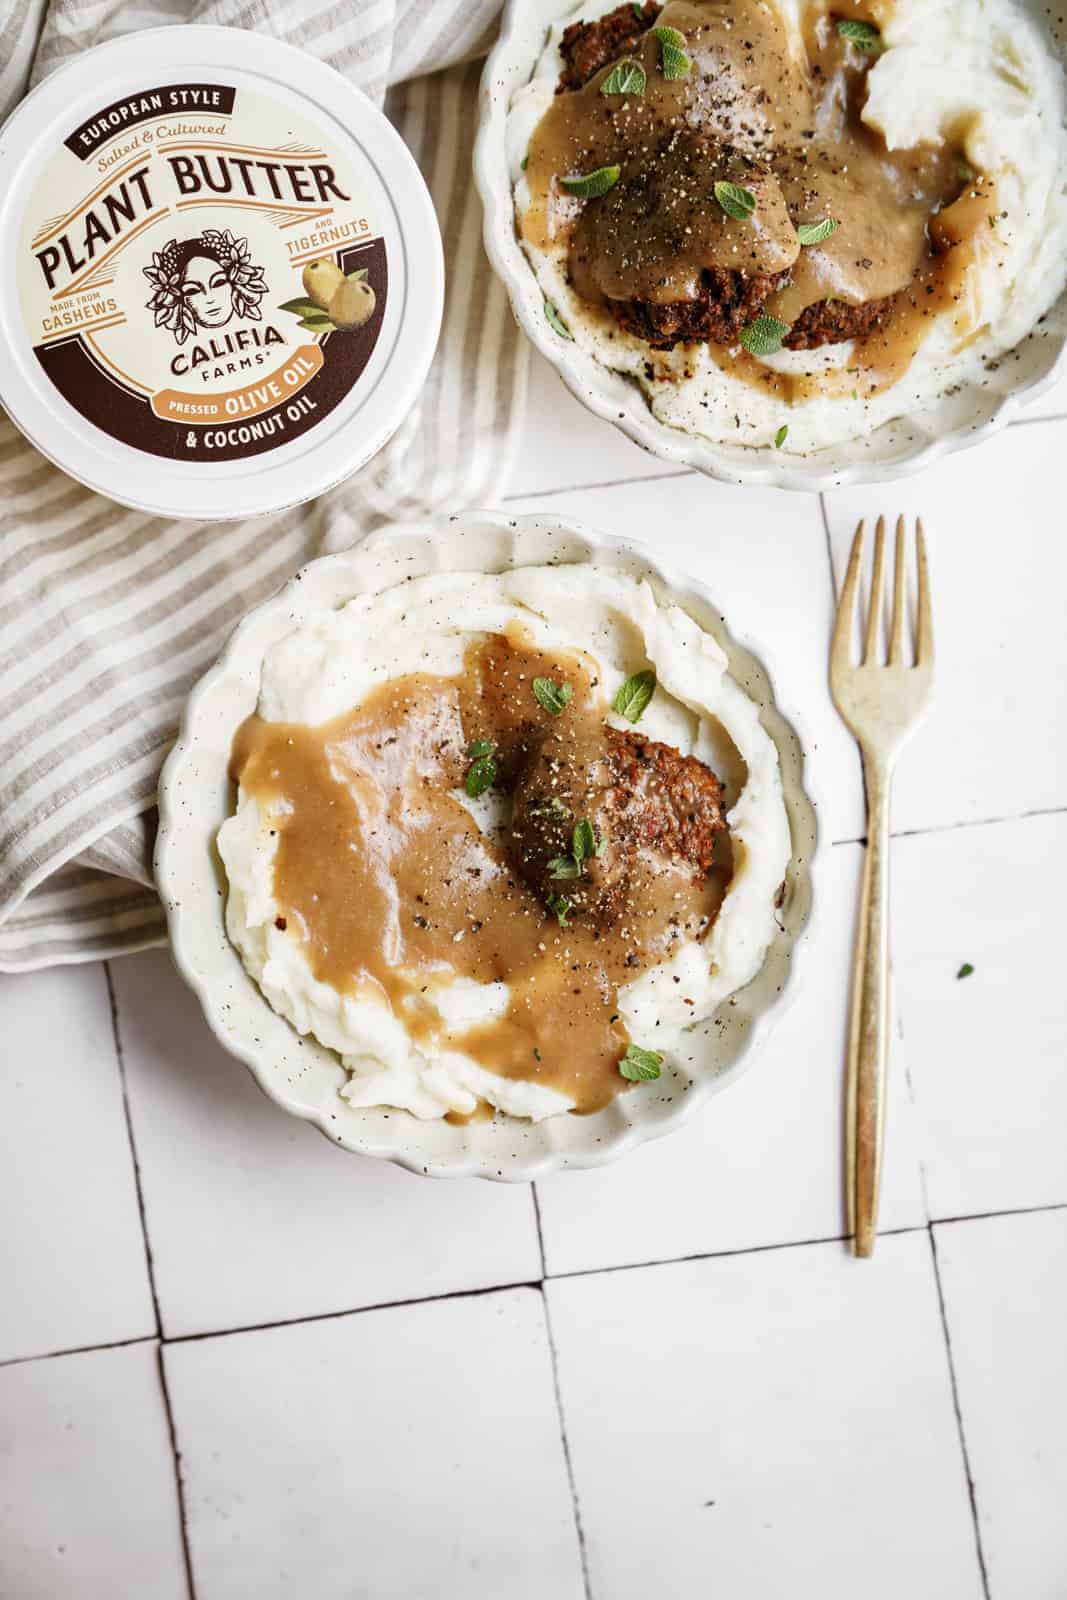 Vegan meatballs with a side of vegan mashed potatoes and gravy on countertop.